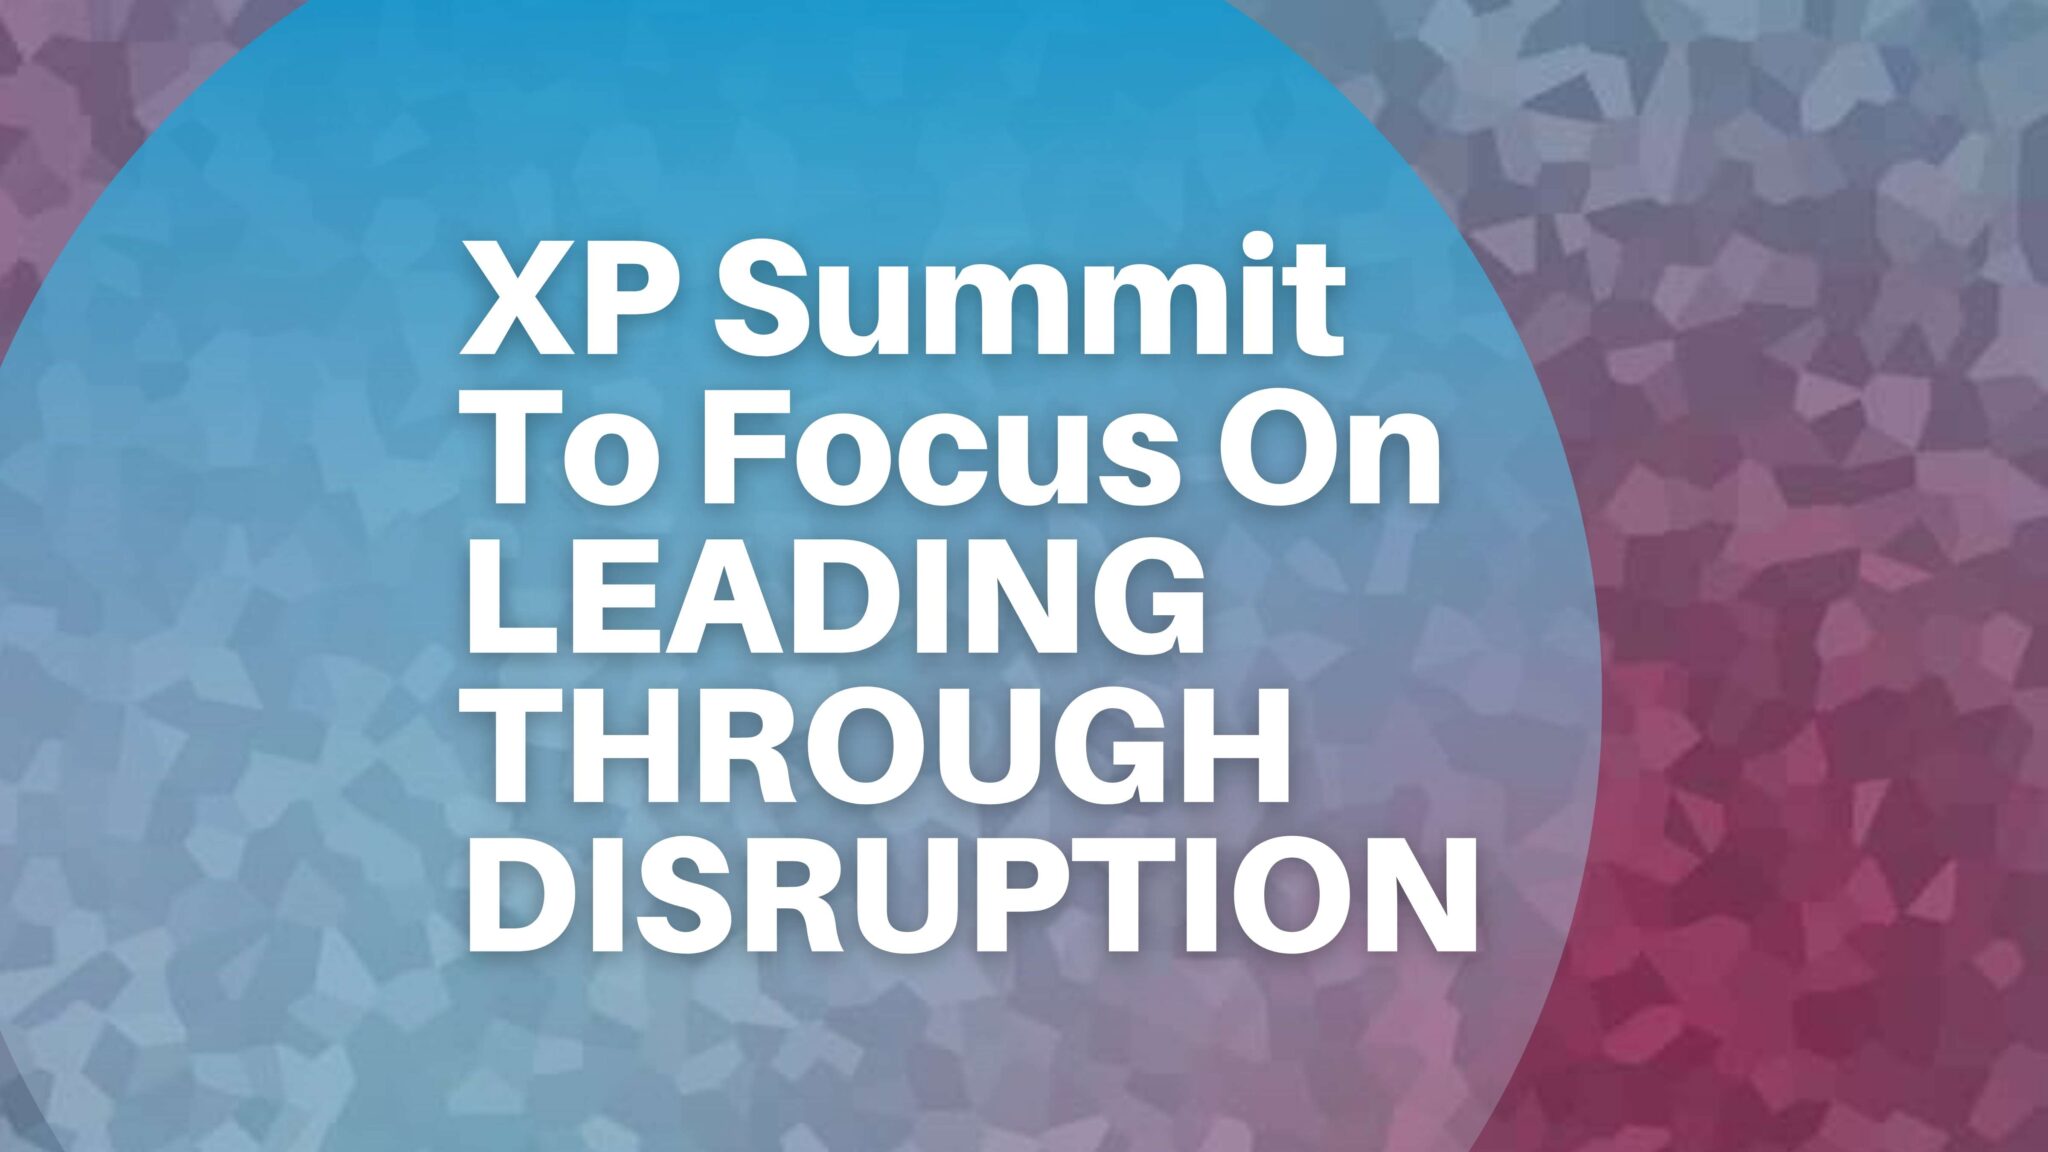 XP Summit Conference 2022